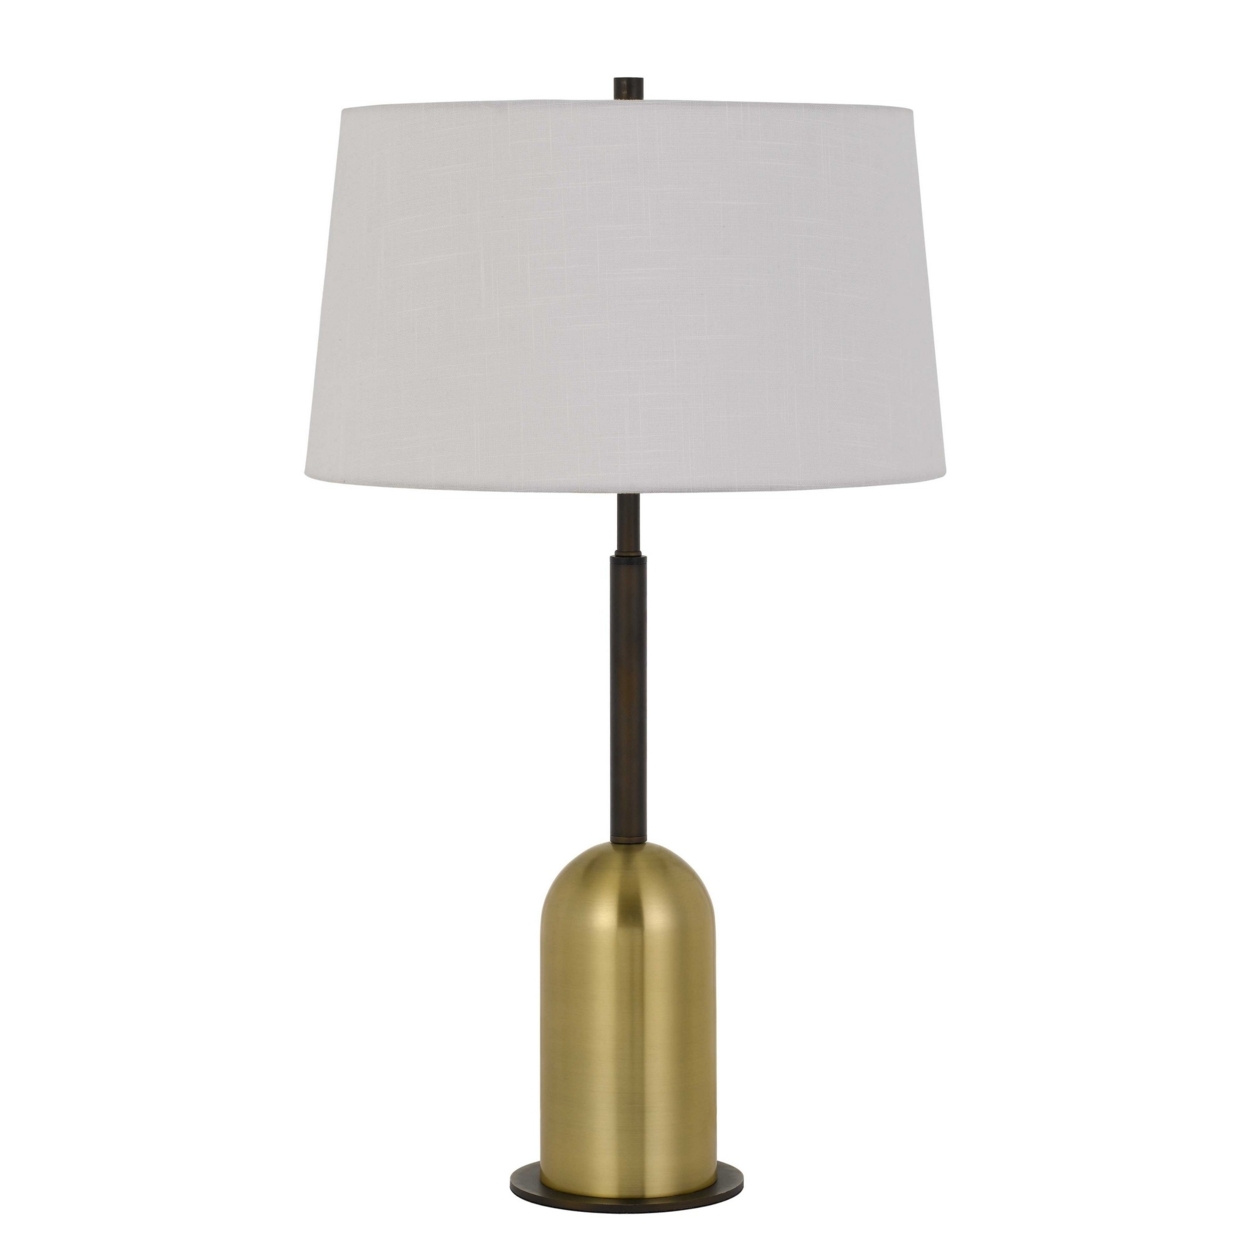 30 Metal Desk Lamp With Drum Style Shade, Brown And Gold- Saltoro Sherpi